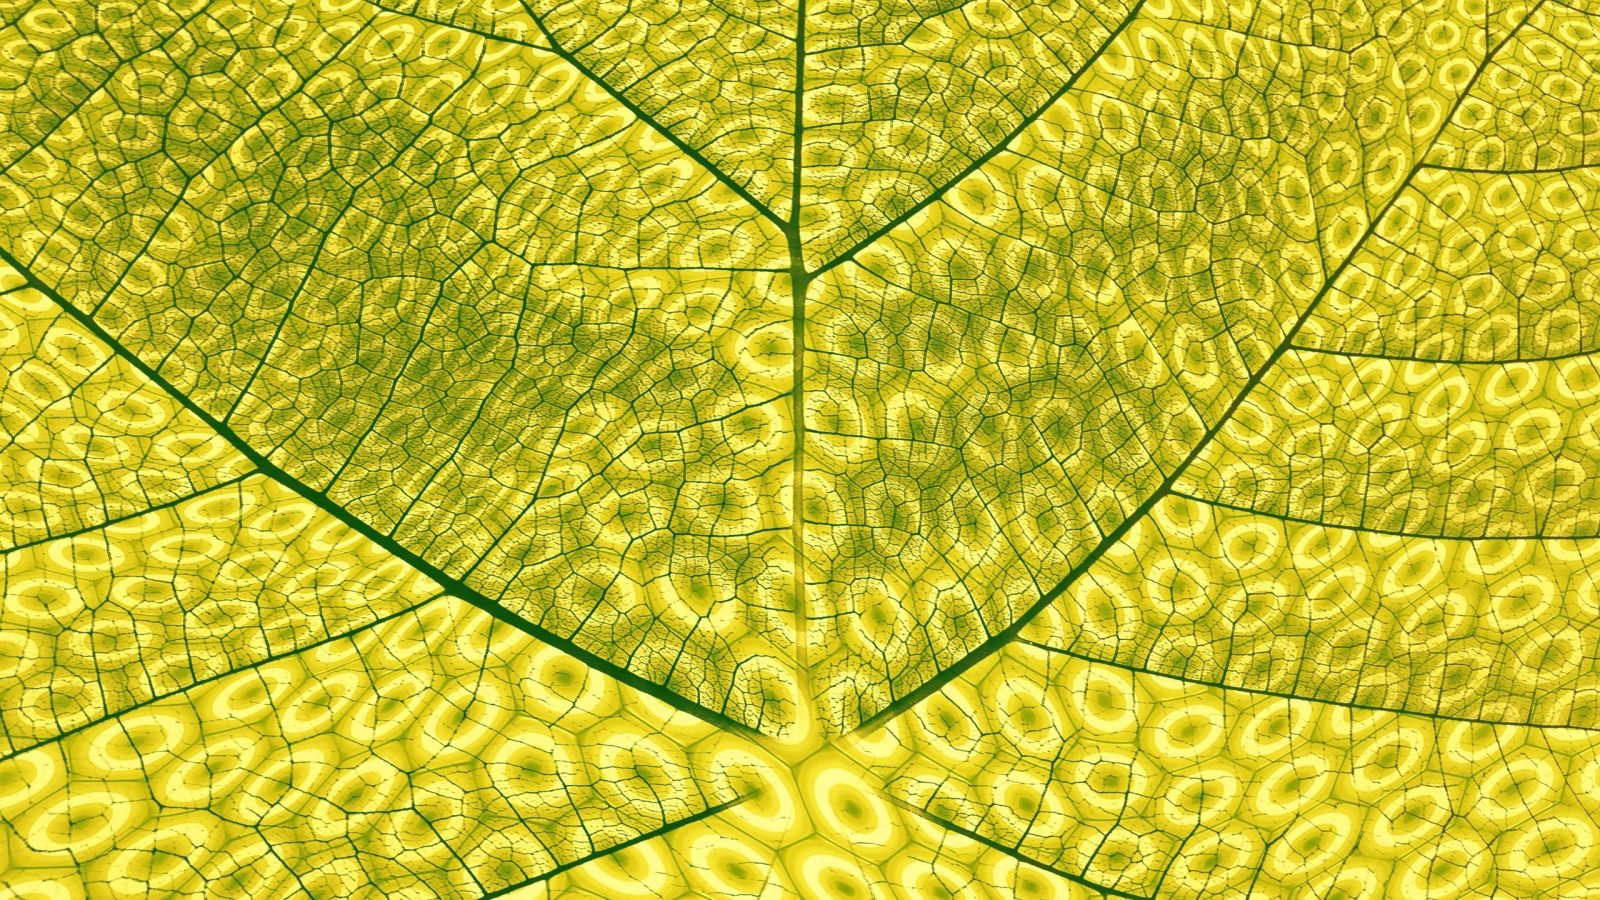 Synthetic Photosynthesis - Abstract Illustration